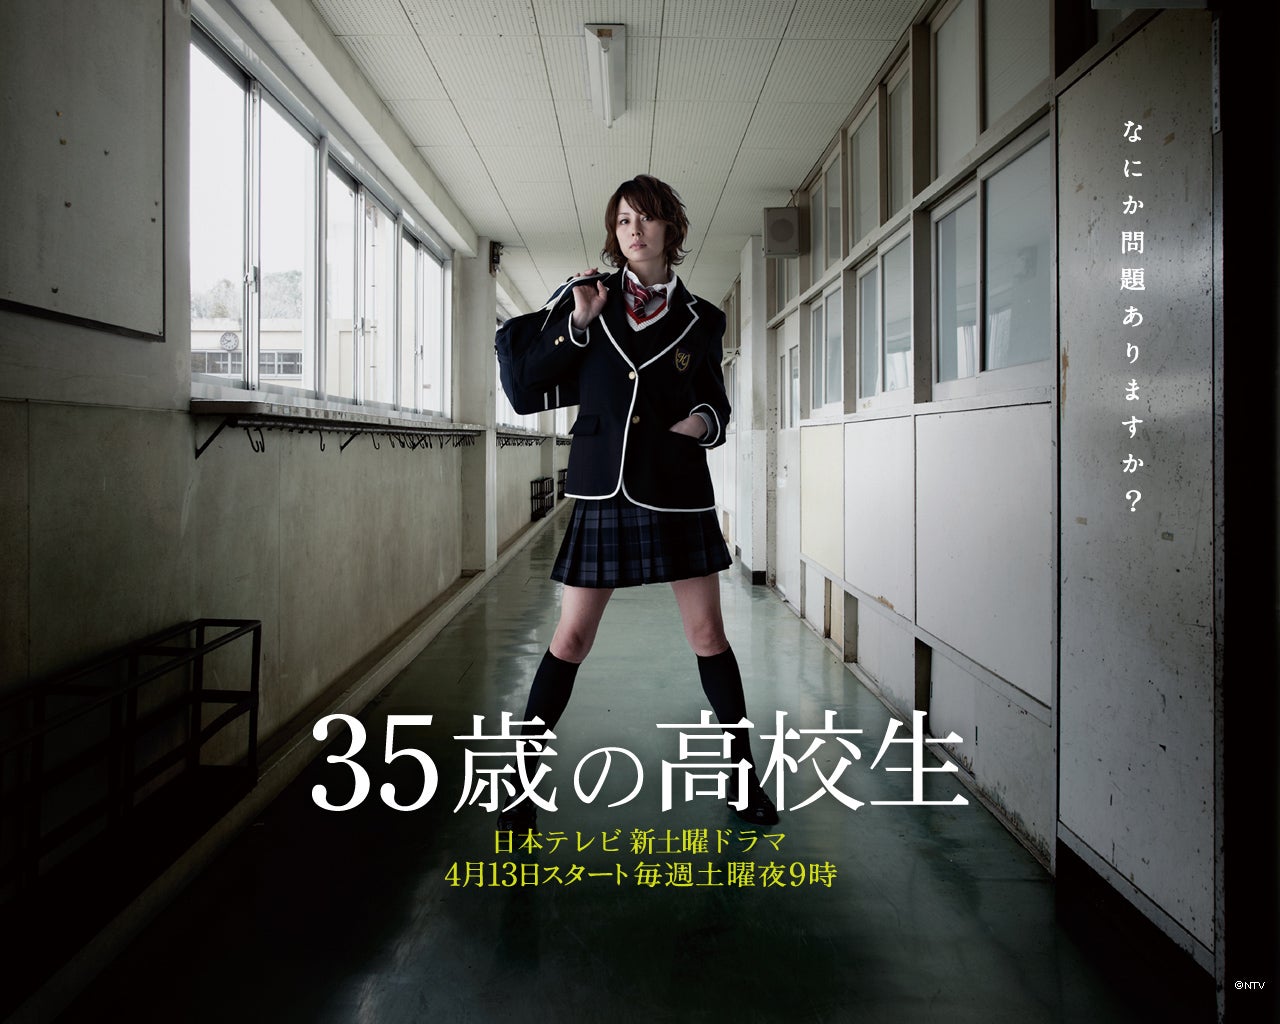 TV ratings for The 35 Year-old High School Student (35歳の高校生) in Canada. NTV TV series